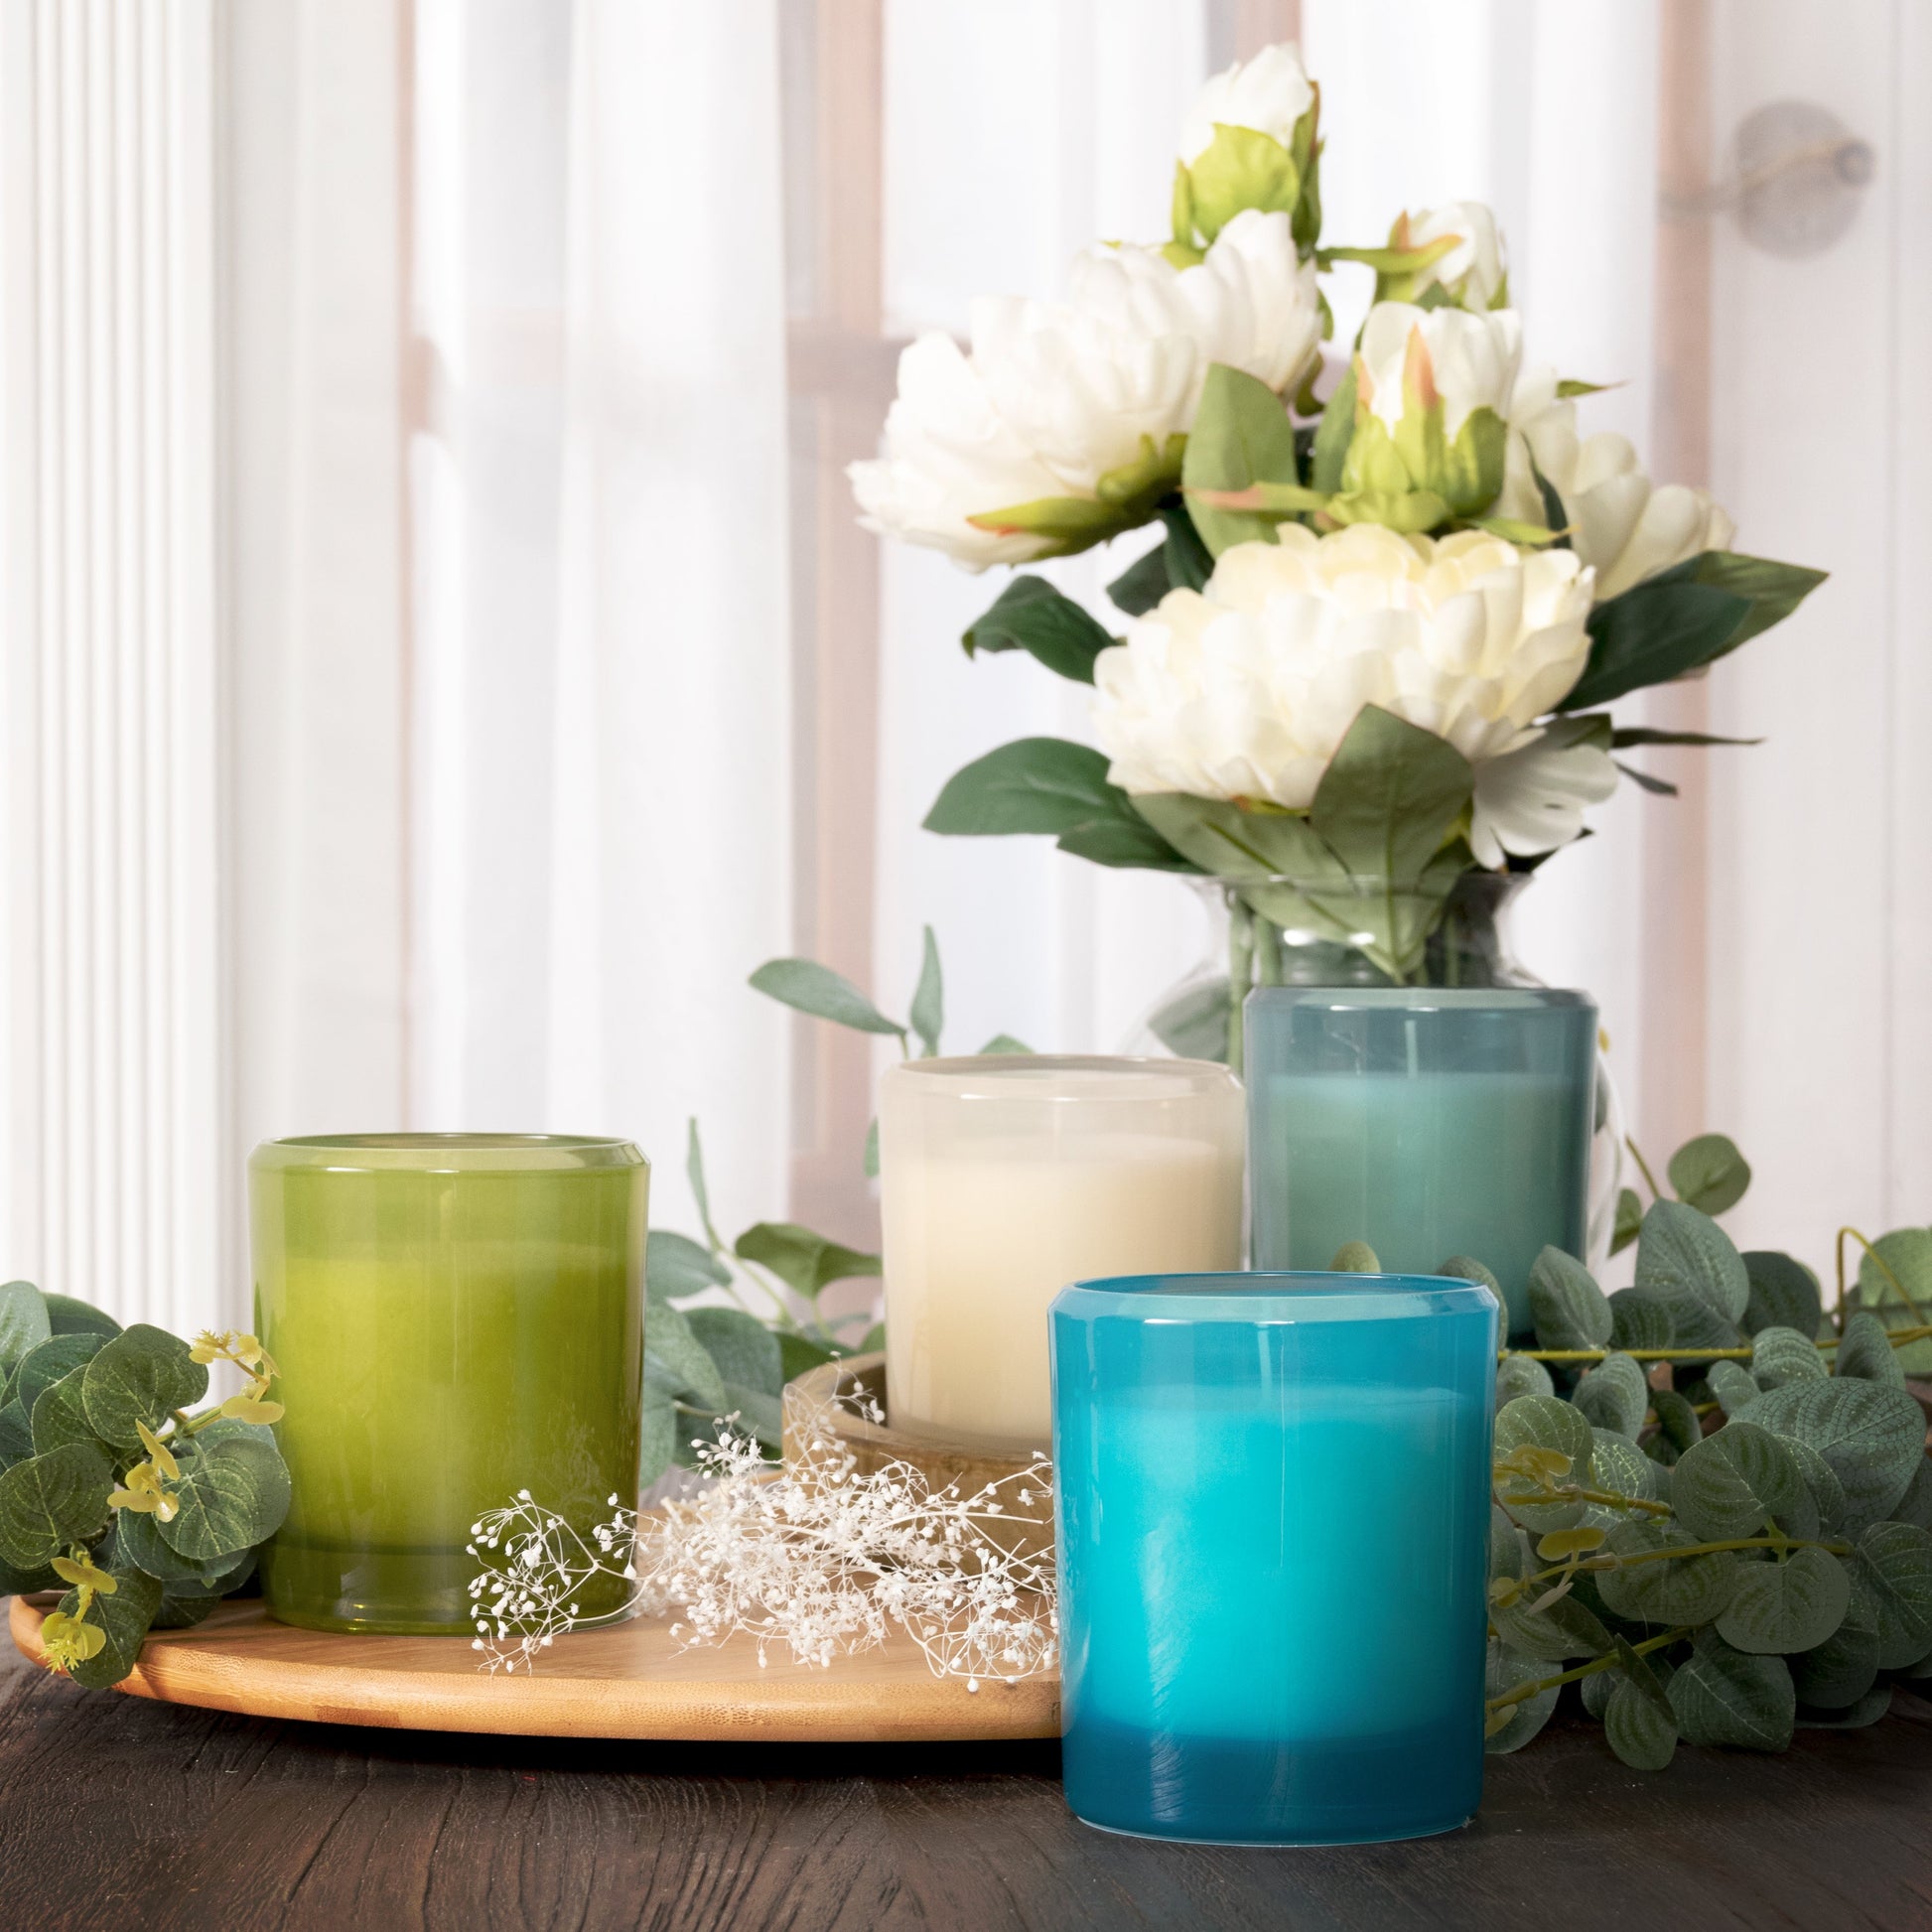 Pier 1 Sea Air™ 8oz Boxed Soy Candle - The Home Resolution